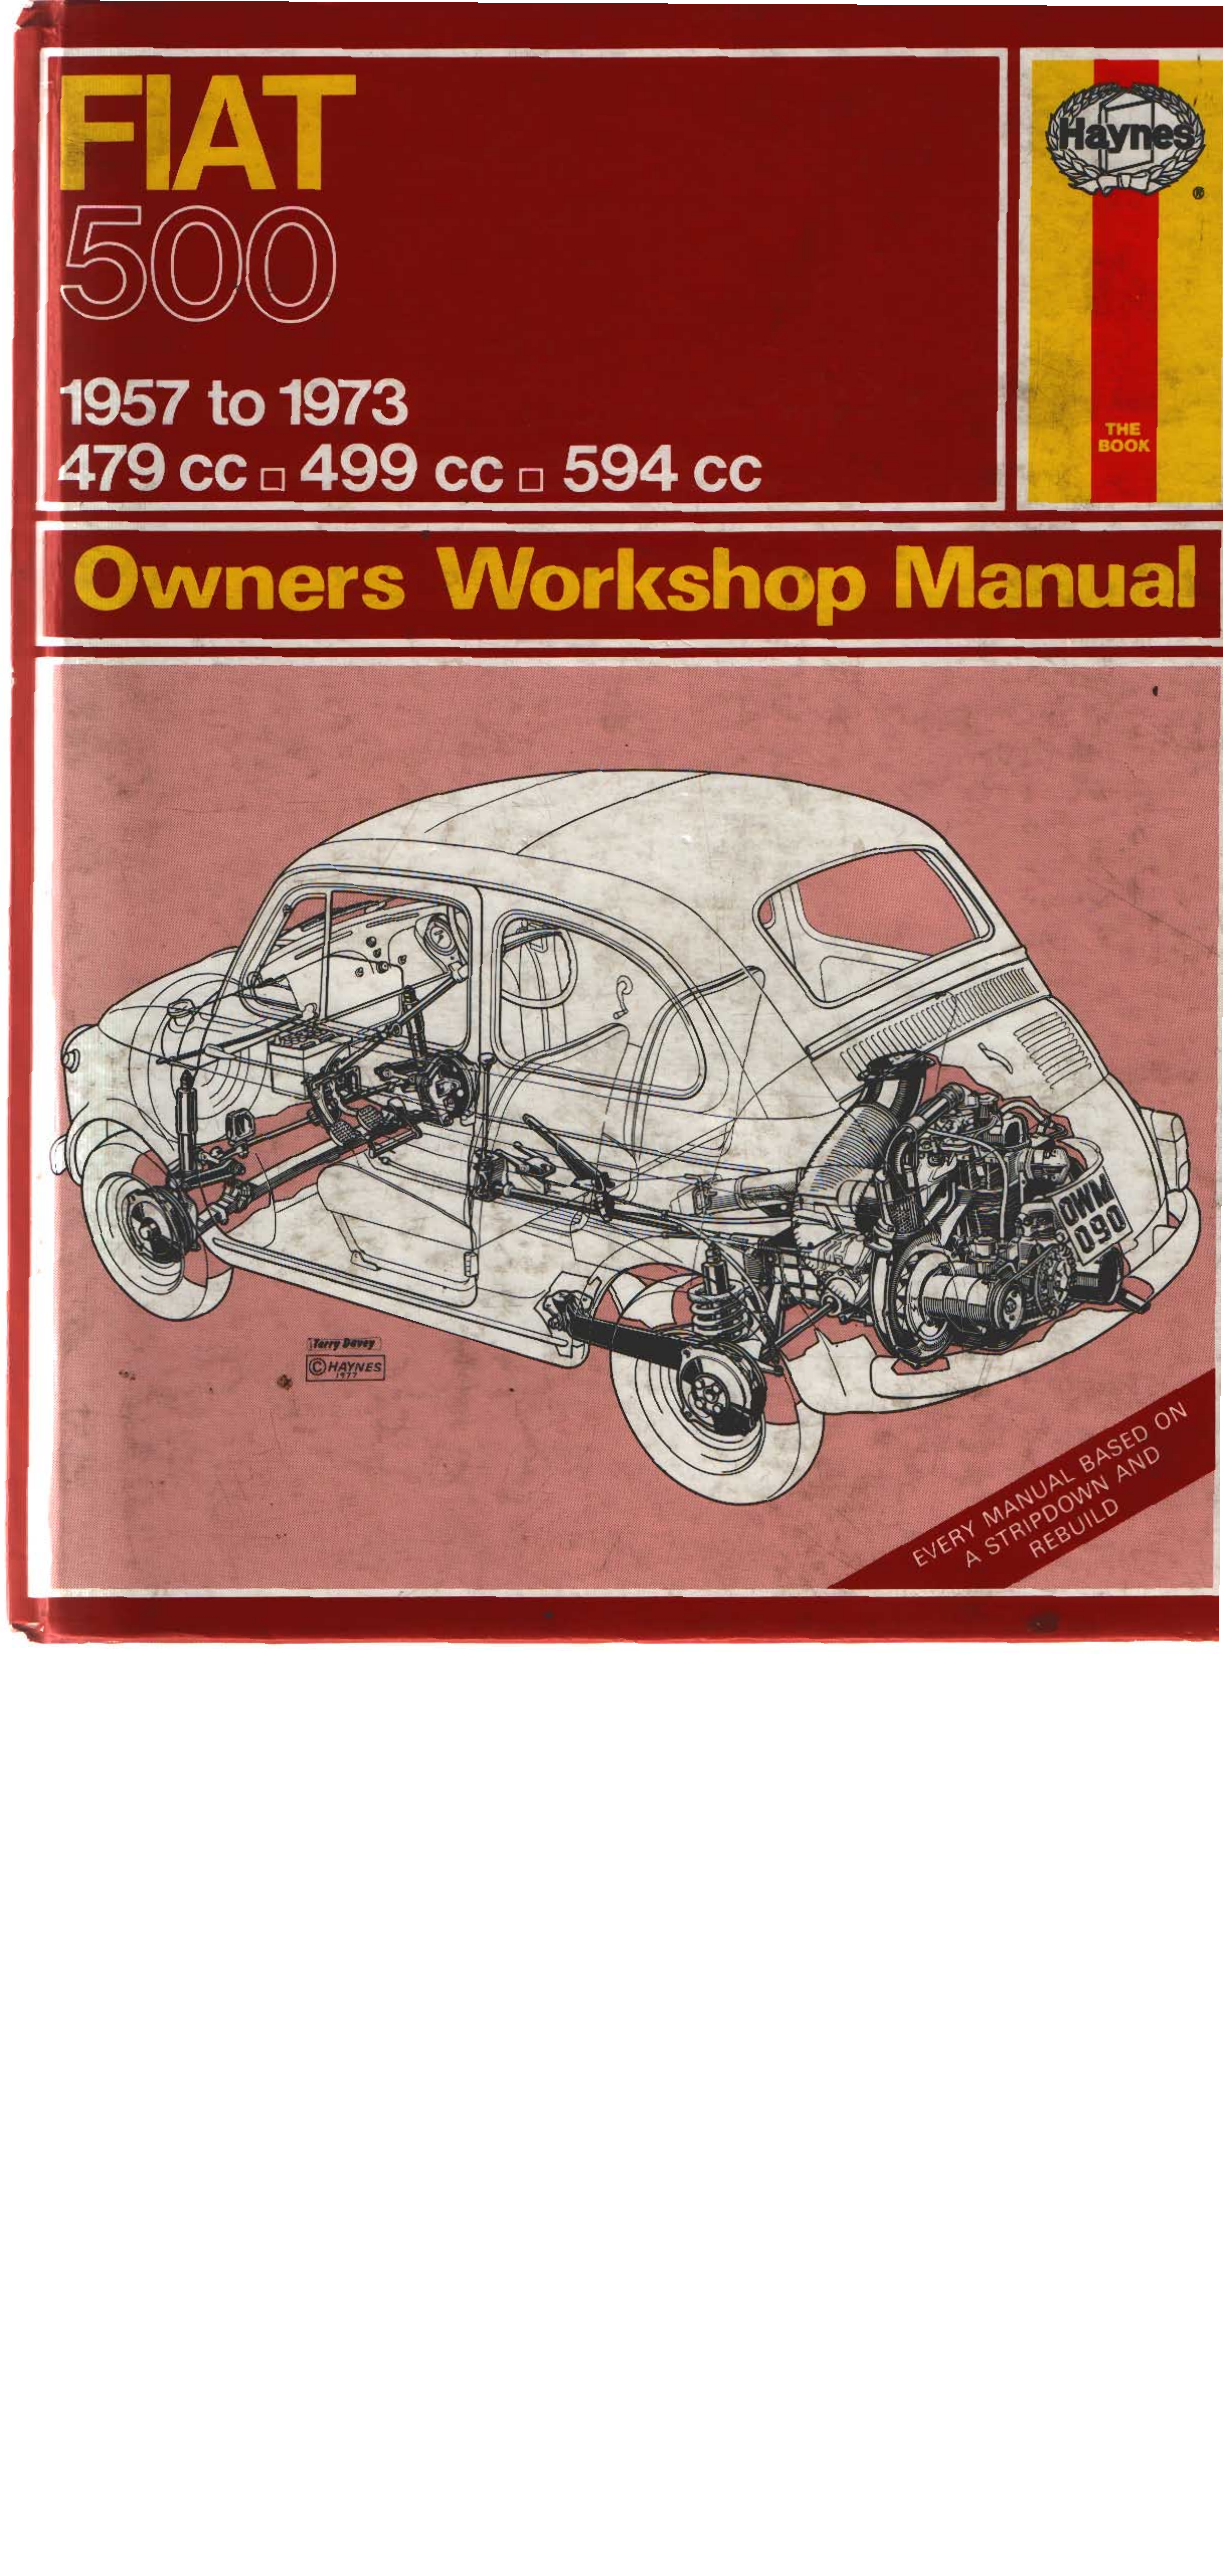 1957-1973 Fiat 500 owners workshop manual Preview image 1